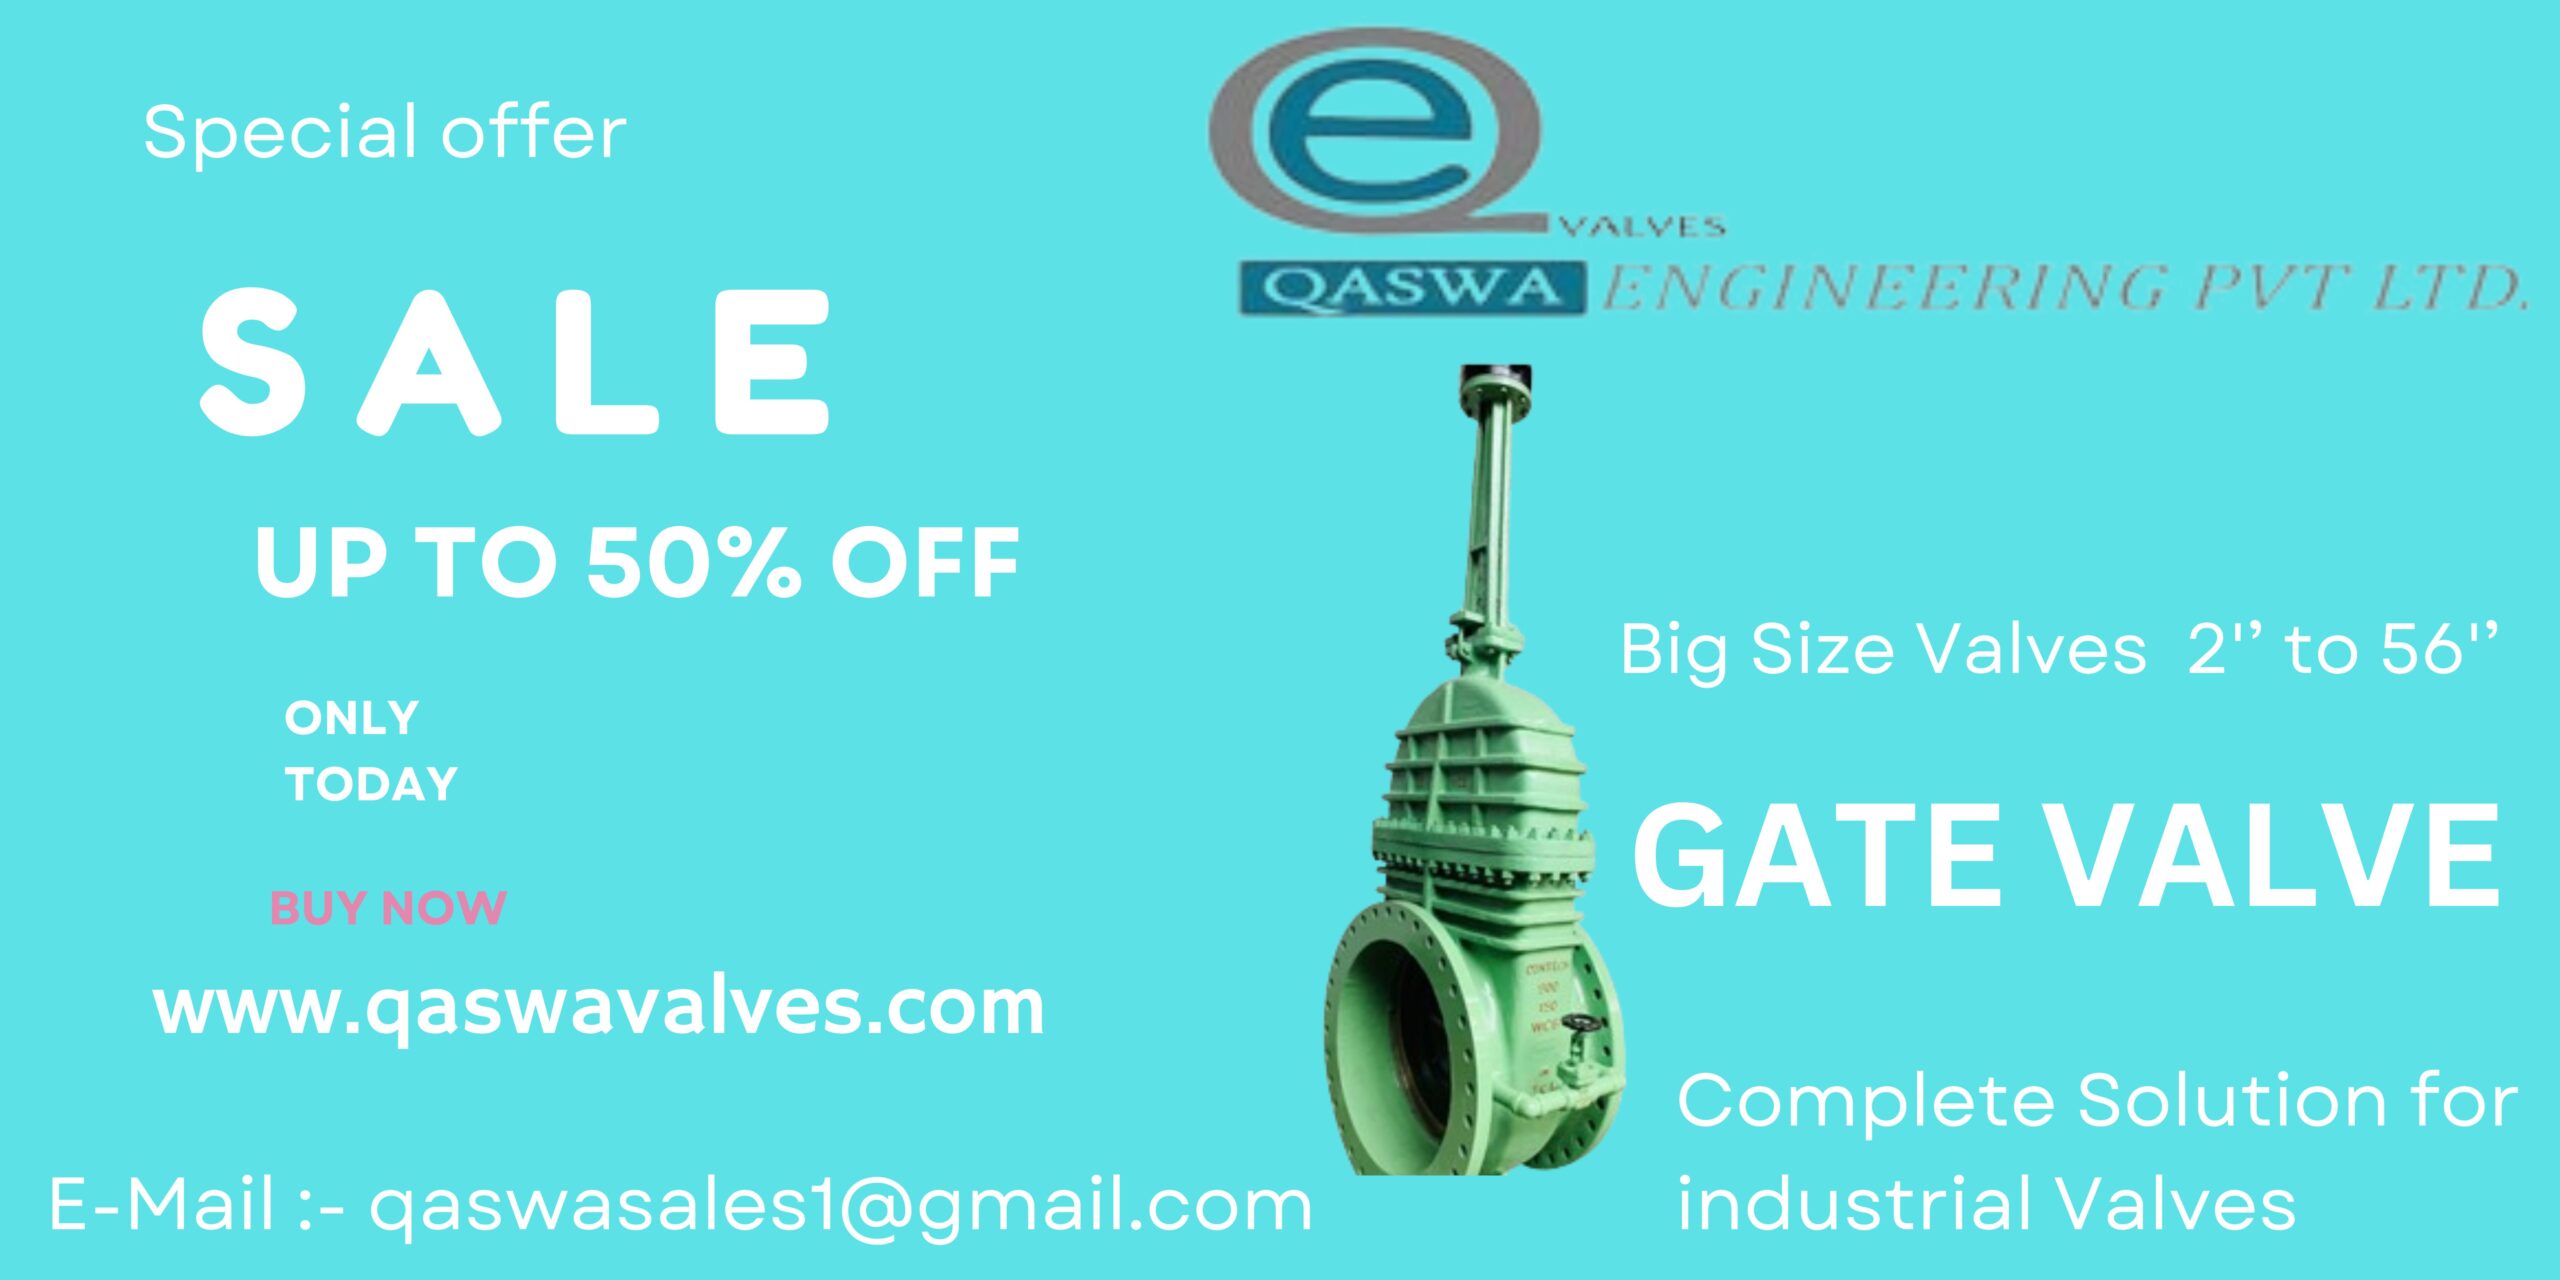 "Audco Valves, Spirax Forbes Marshall, Spirax Steam Traps, Leader Valves, Audco Ball Valves, L&T Valves, KSB Valves, Uni Klinger Valves, Utam Make Valves, Utam Make Valves, Disc Check Valves, Industrial Valves, Industrial Globe Valves, Slurry Valves, Fitting Accessories, Gate Valves, Strong Brand Globe Valve, Strong Brand Plug Valves, Forbes Marshal Valves, Plug Valves, Forbes Marshal Steam Traps, Piston Valve, KLINGER Make Piston Valve, Trunnion Mounted Ball Valves Manufacturers, Dealers, Suppliers, Traders, Wholesalers and Exporters in India"